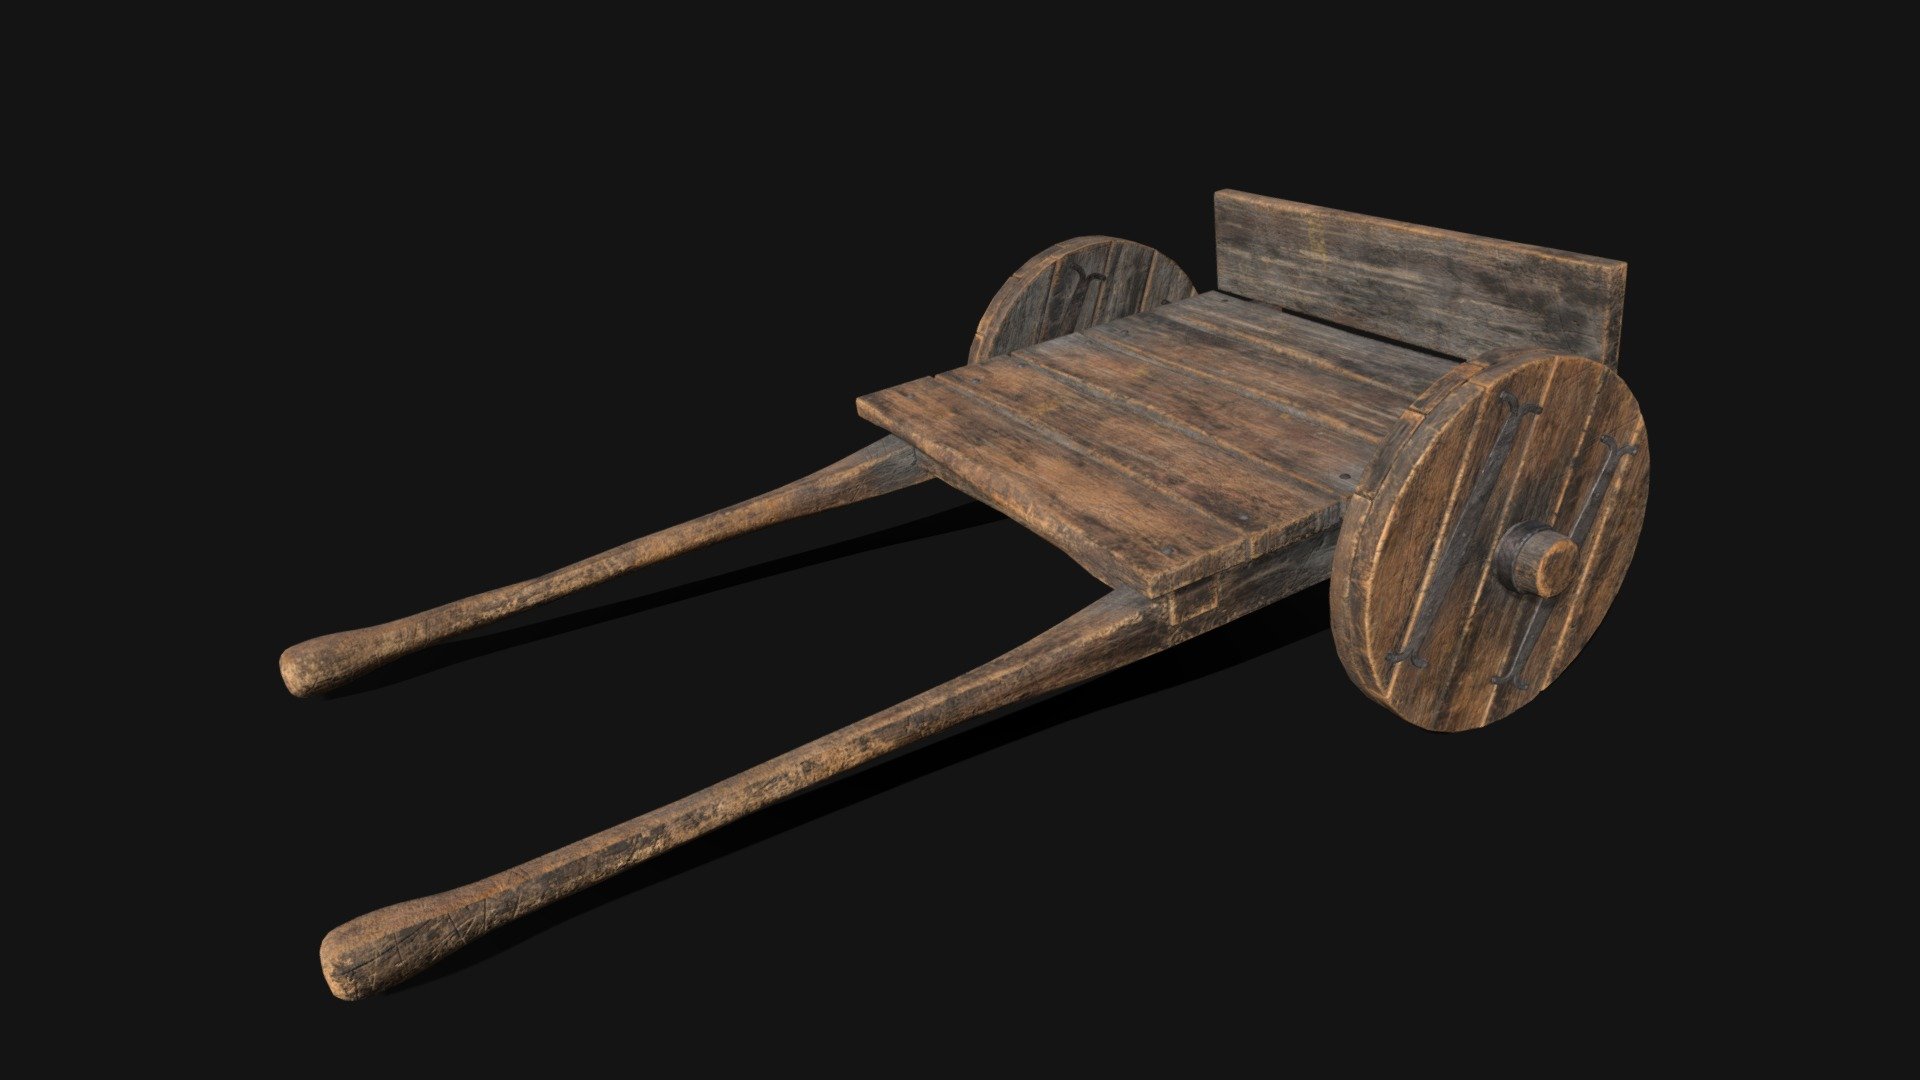 Medieval Wooden Cart 3D Model. This model contains the Medieval Wooden Cart itself 

All modeled in Maya, textured with Substance Painter.

The model was built to scale and is UV unwrapped properly. Contains only one 4K texture set.  

⦁   14186 tris. 

⦁   Contains: .FBX .OBJ and .DAE

⦁   Model has clean topology. No Ngons.

⦁   Built to scale

⦁   Unwrapped UV Map

⦁   4K Texture set

⦁   High quality details

⦁   Based on real life references

⦁   Renders done in Marmoset Toolbag

Polycount: 

Verts 8092

Edges 15321

Faces 7373

Tris 14186 

If you have any questions please feel free to ask me 3d model